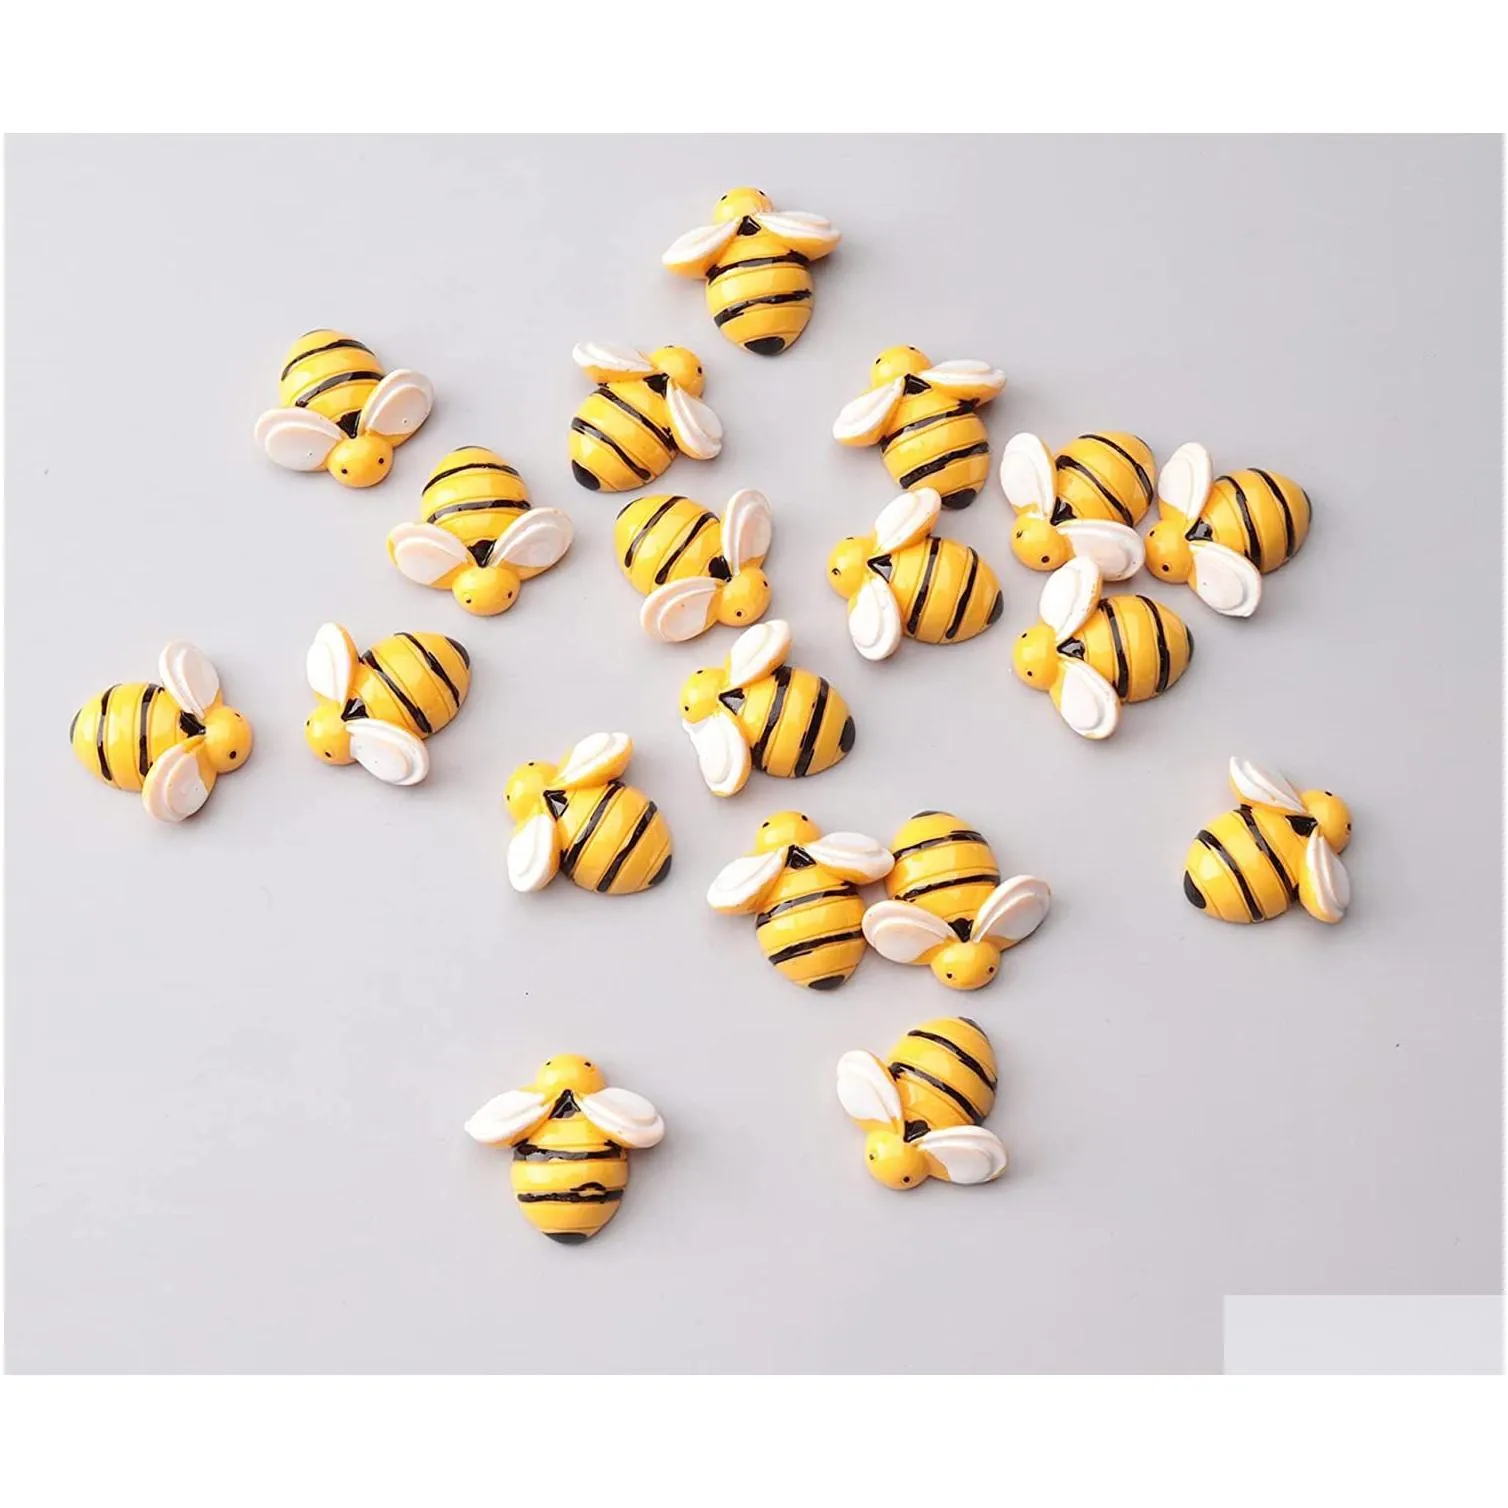 Craft Tools Mini Bee Ornaments Tiny Resin Diy Flatback Embellishment Bumble For Hair Clip Craft Art Project Home Garden Decoration Jew Dhked